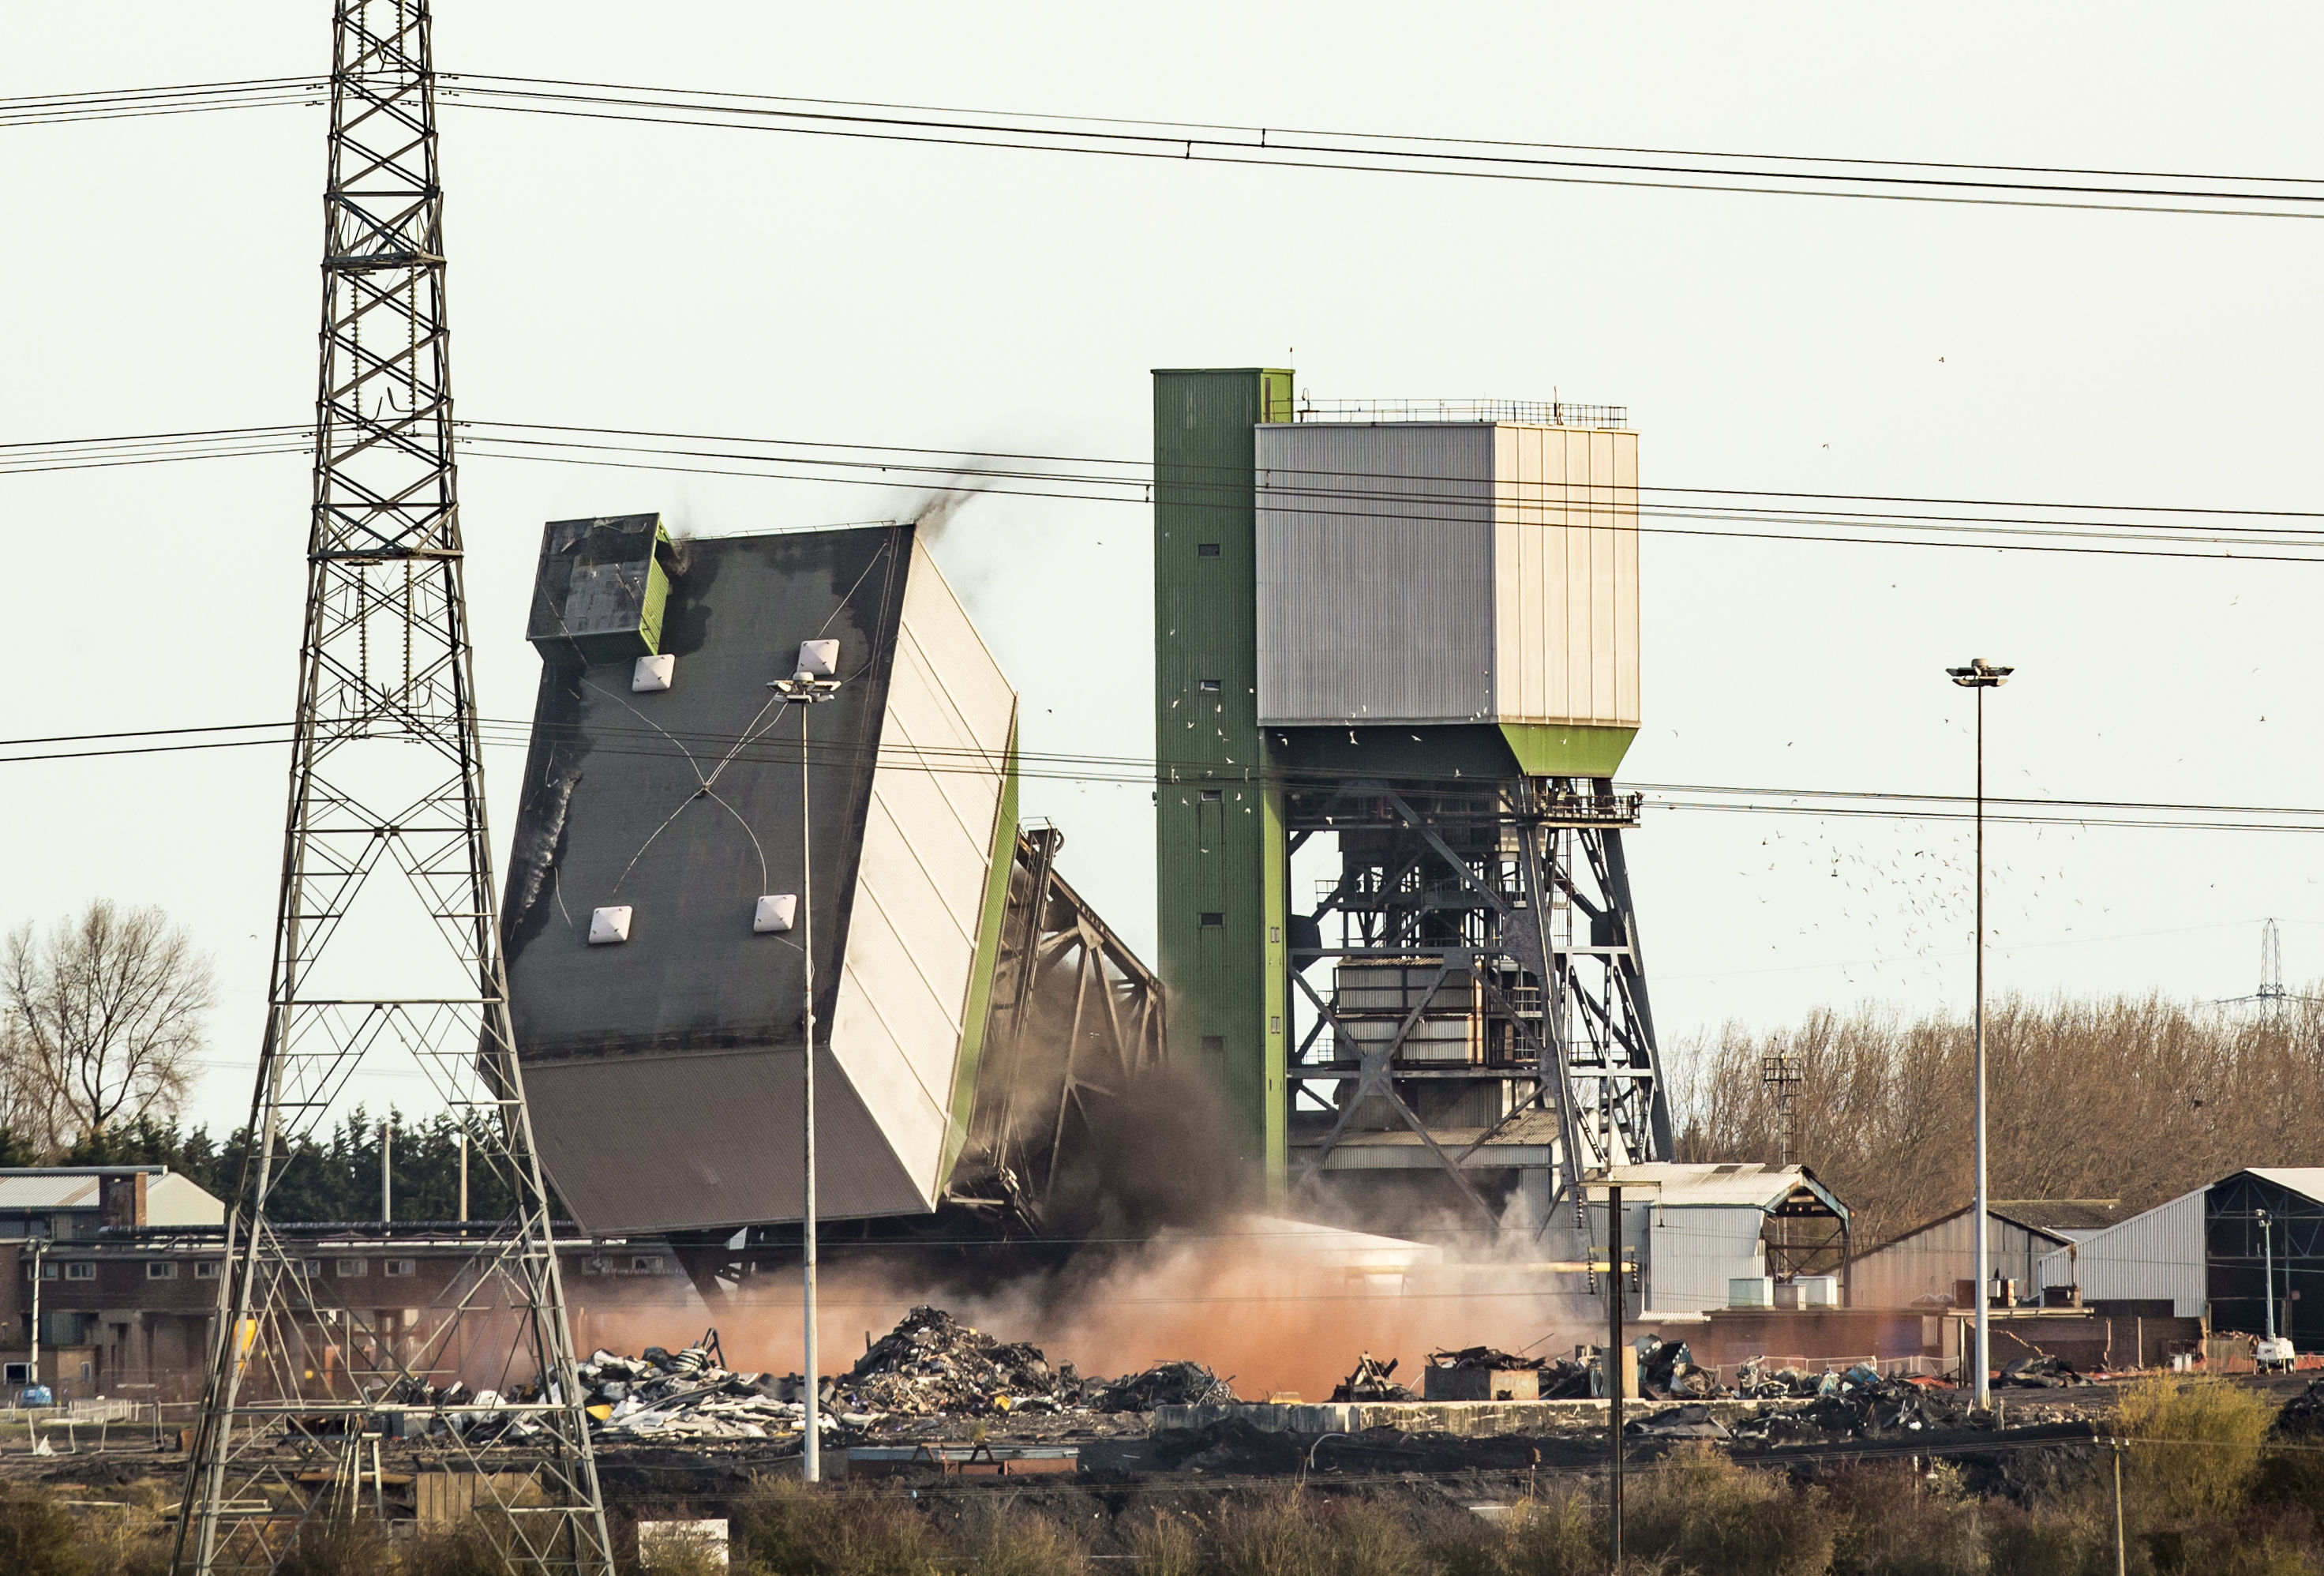 The No 2 Winding Tower at Kellingley Colliery in Yorkshire is demolished.